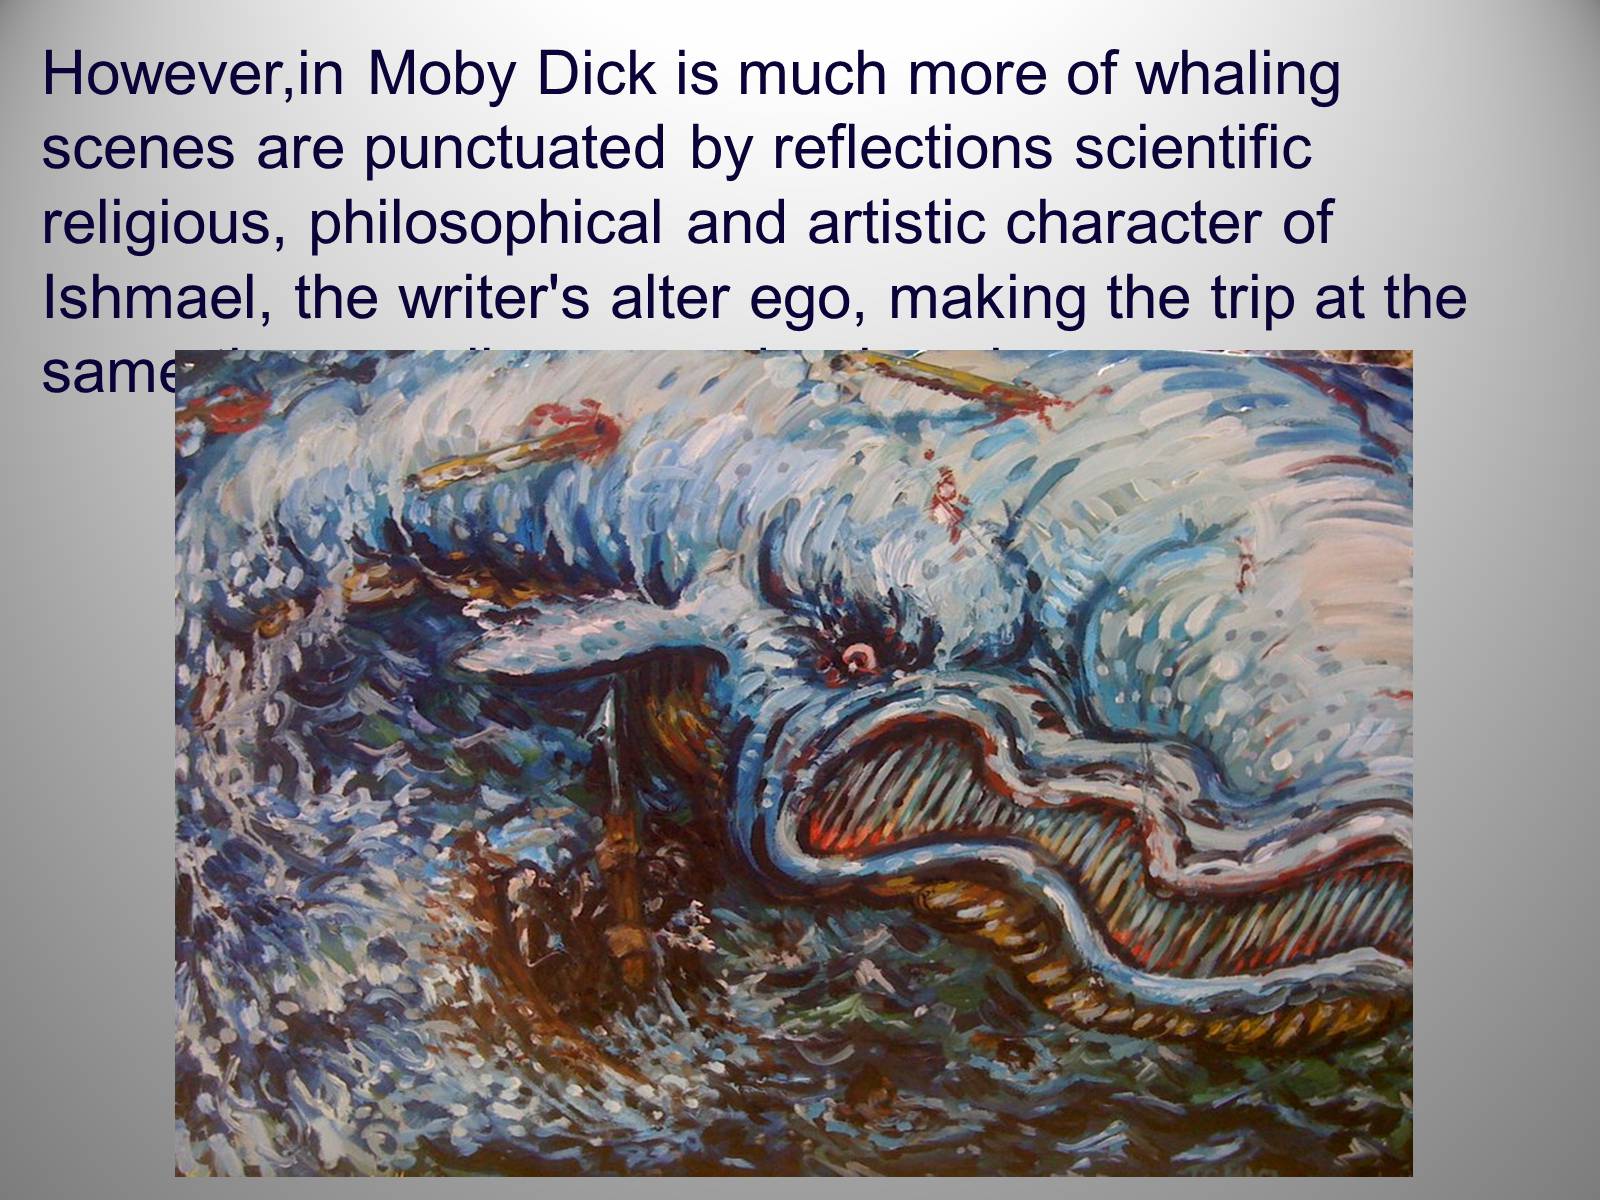 Moby dick and science philosophy religion